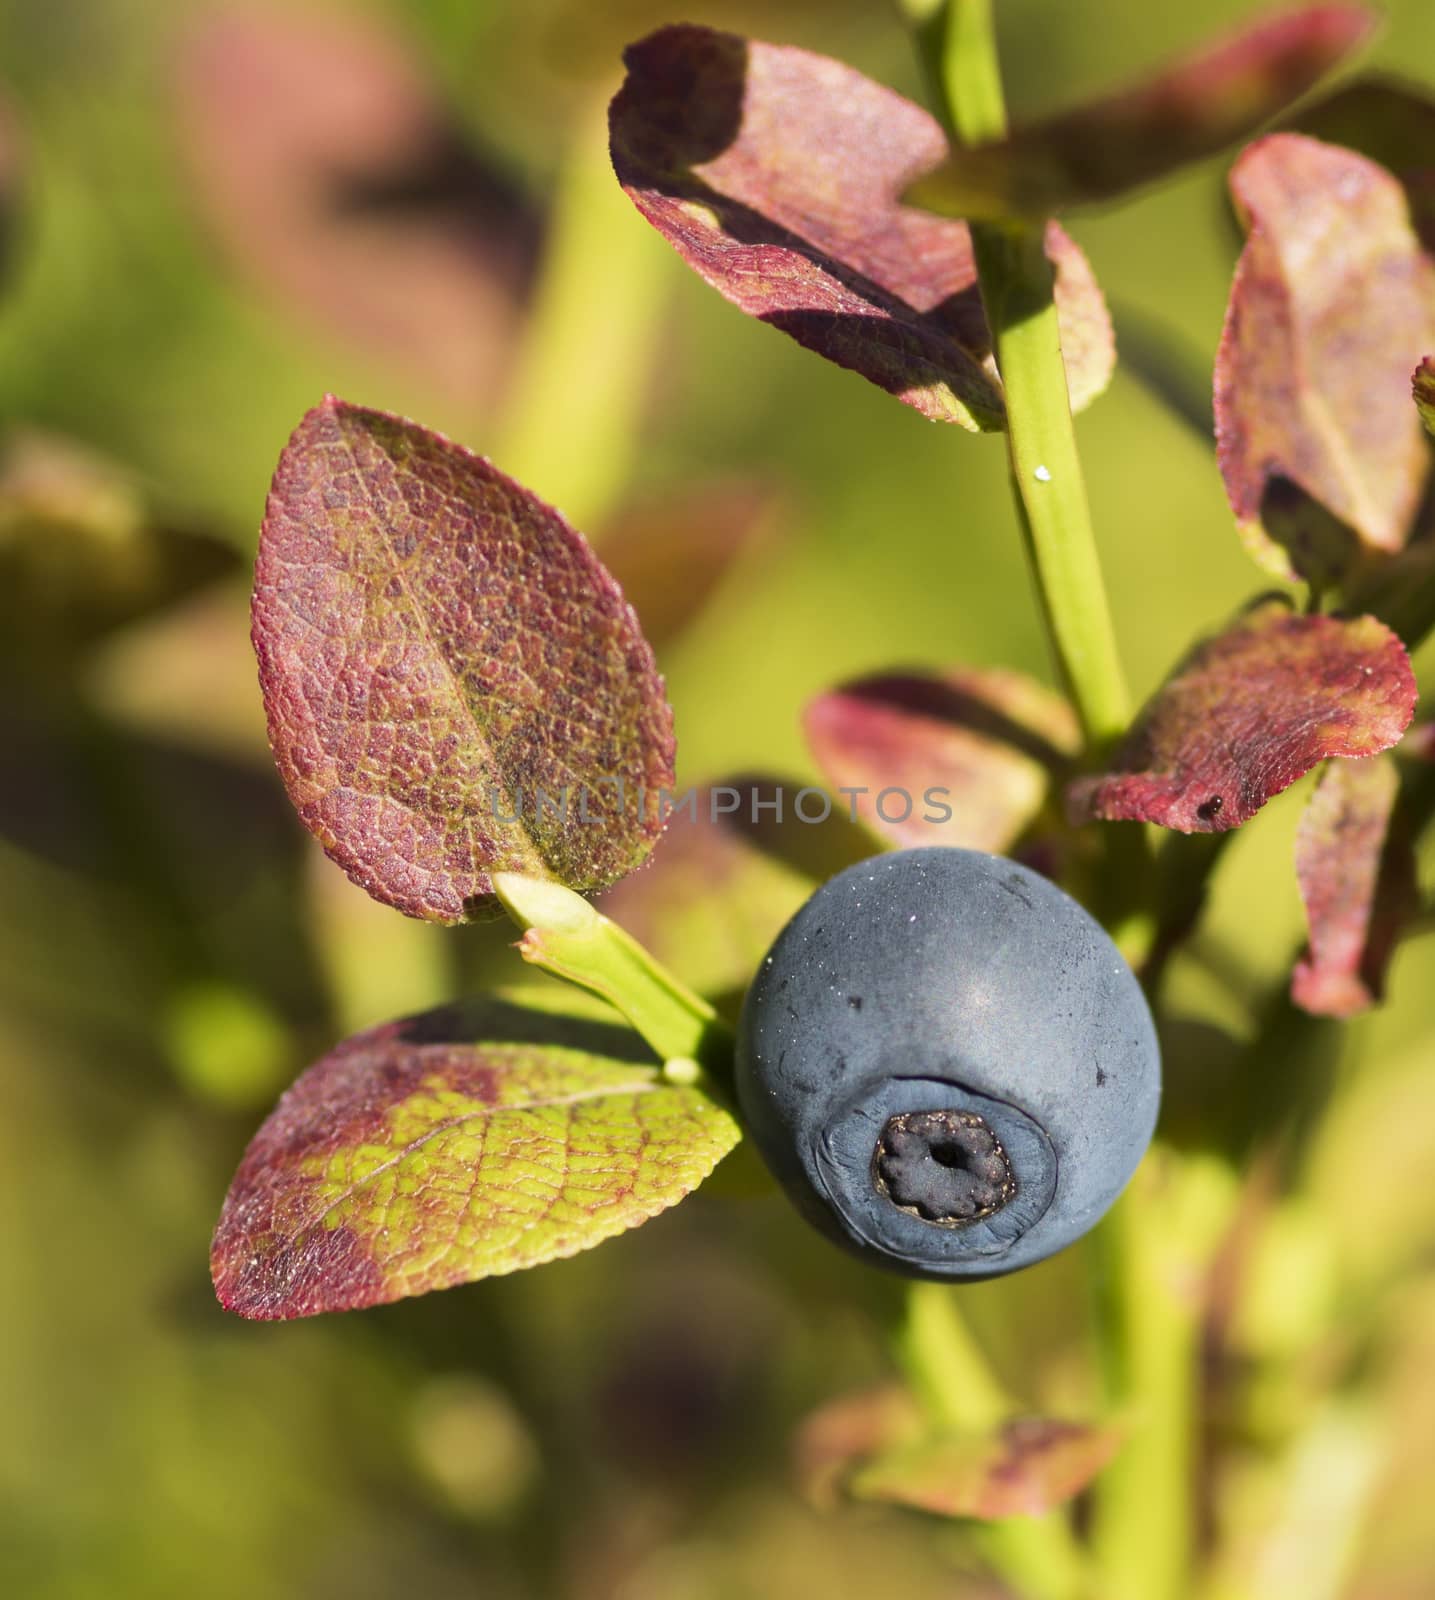 Dark blue ripe blueberries in theforest, macro photography